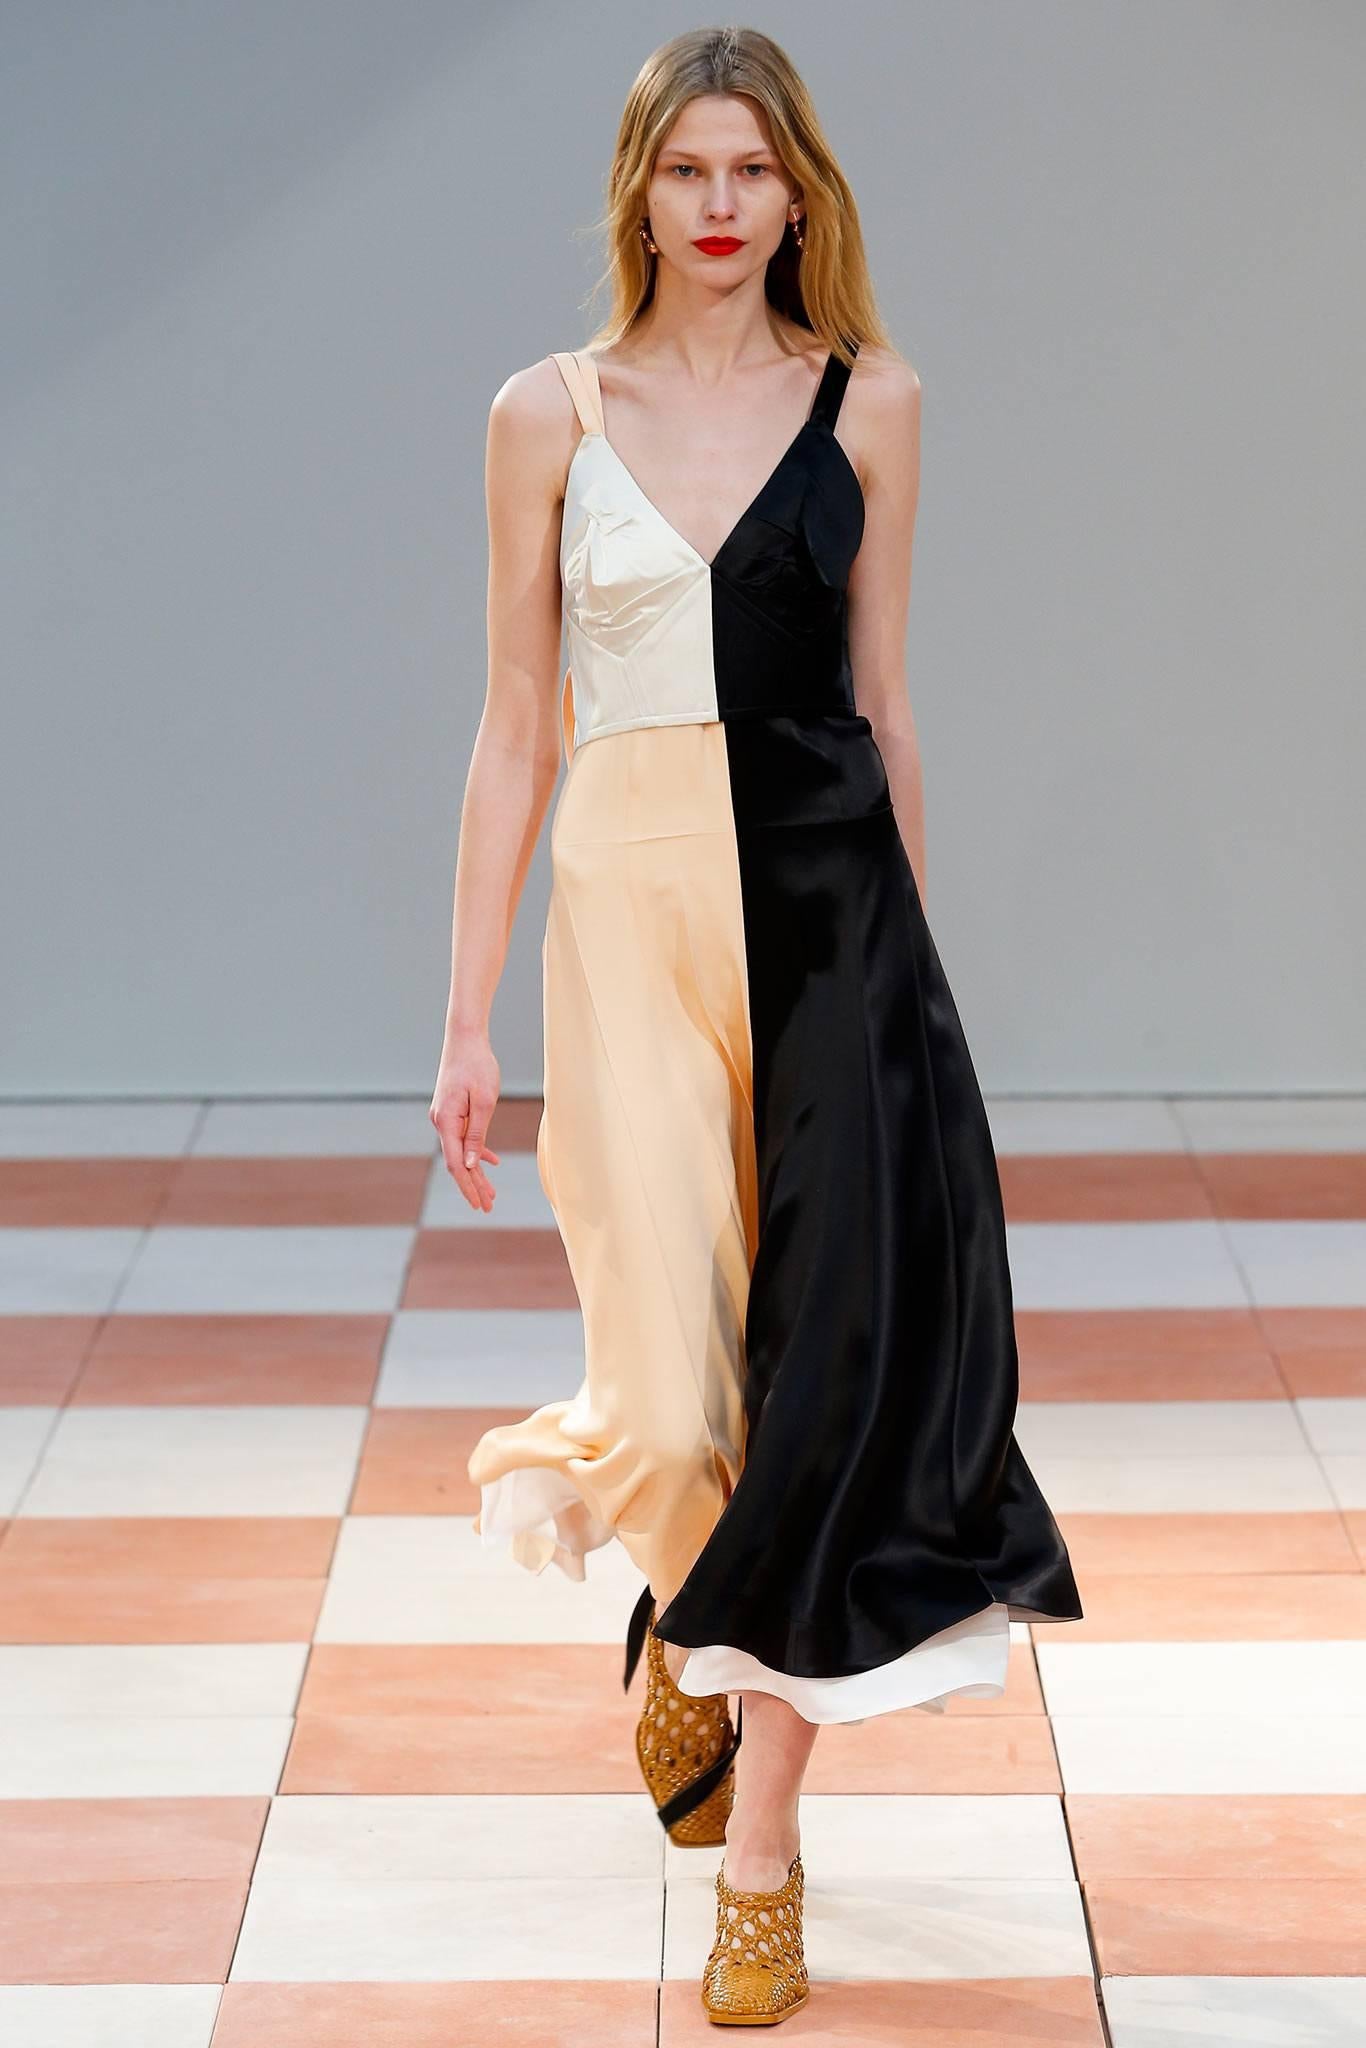 Well documented silk color-blocked layered slip dress with bustier and long ties designed by Phoebe Philo for Celine exactly as seen on the runway for fall of 2015. Labeled a French size 36 (32" maximum bust). Dress creates beautiful movement